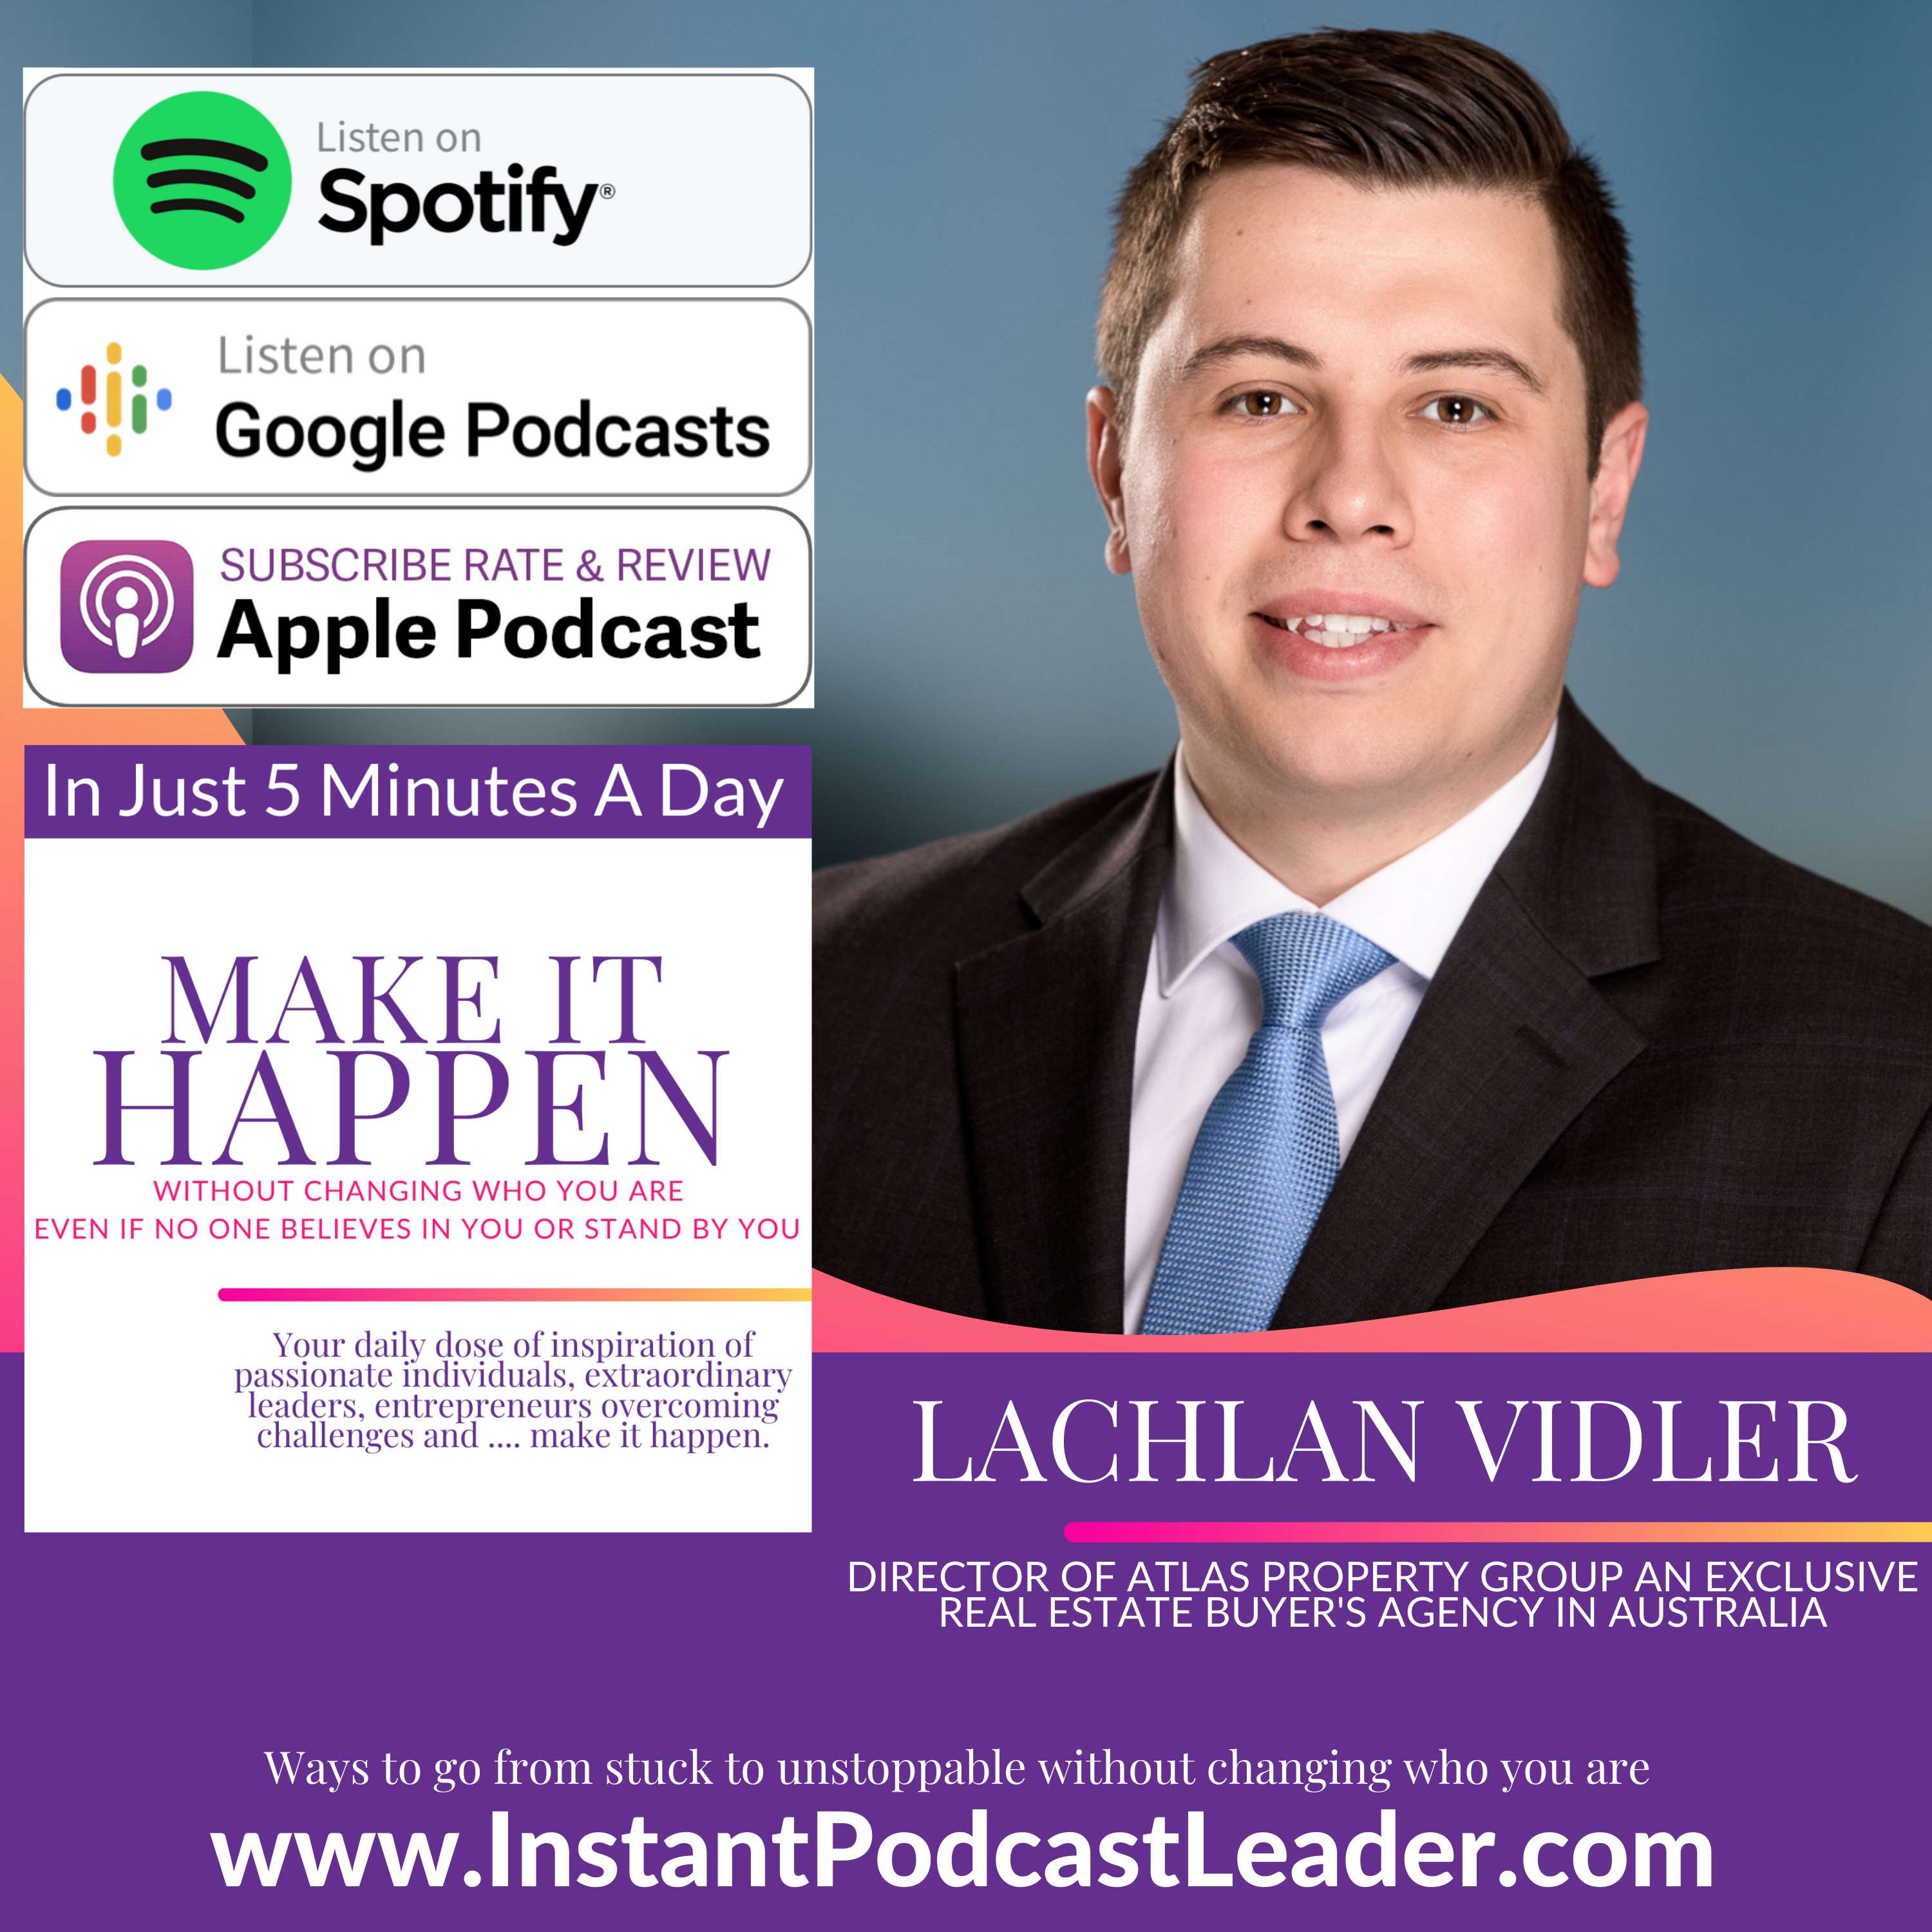 MIH EP44 Lachlan Vidler Director of Atlas Property Group an exclusive real estate buyer's agency in Australia